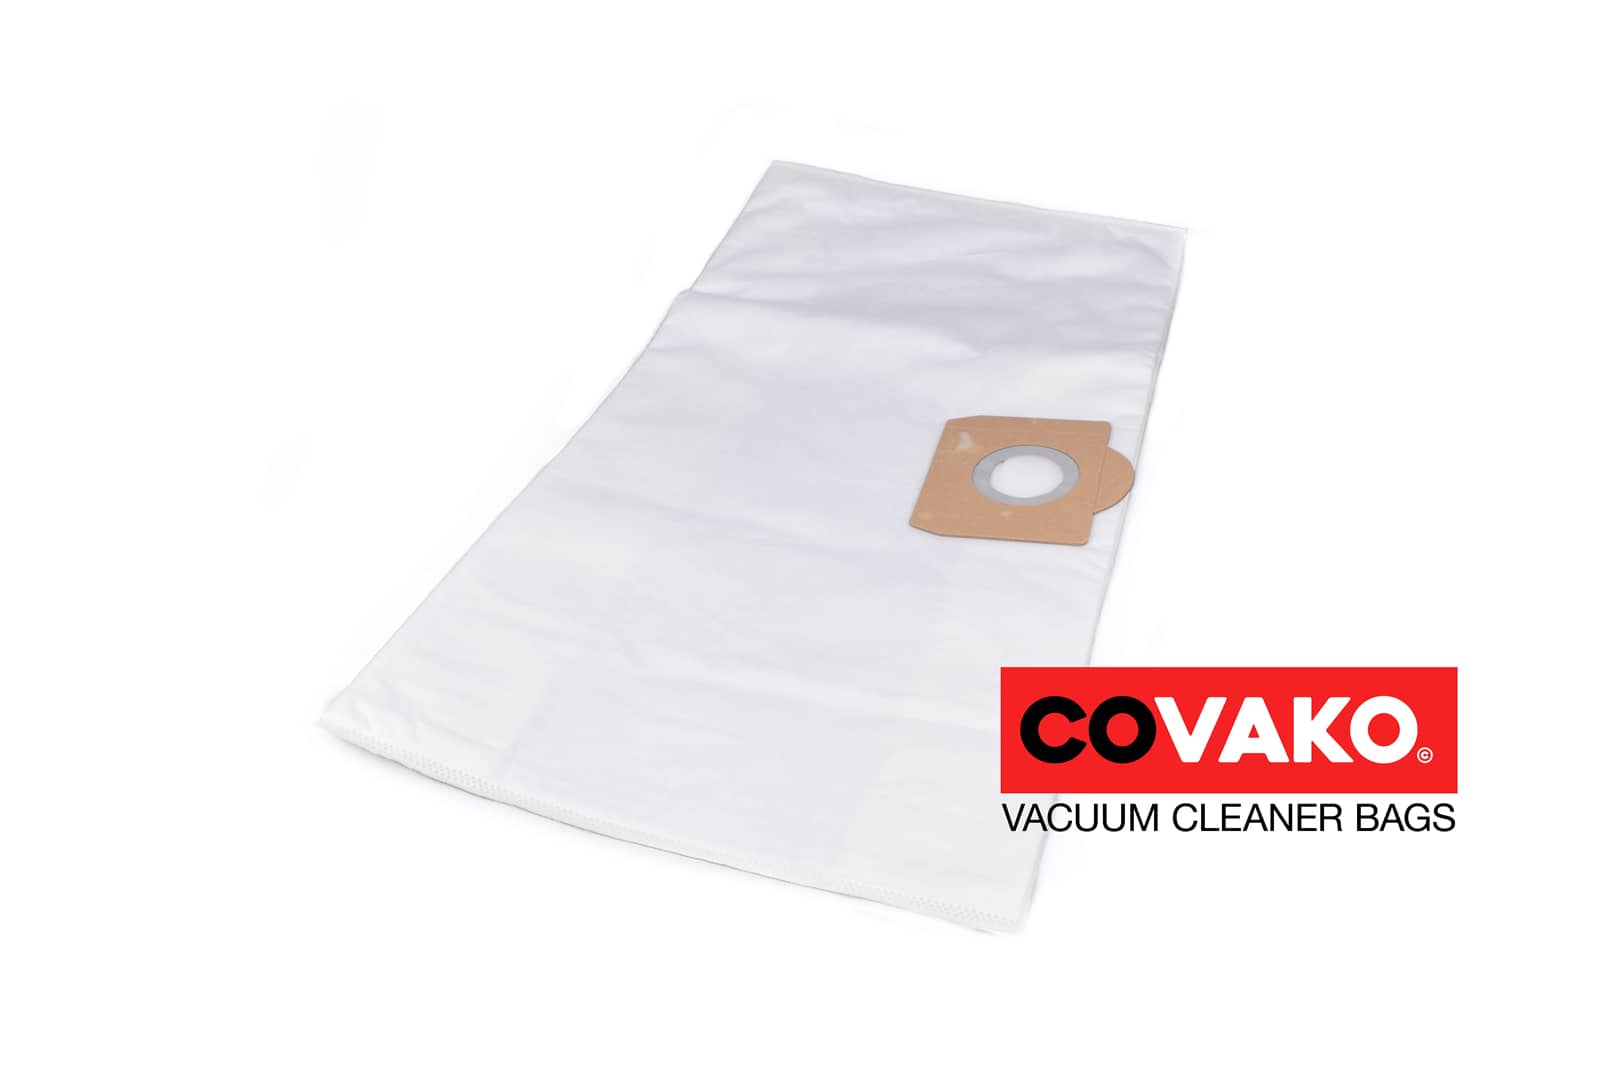 DiBo Windly 515 TC / Synthesis - DiBo vacuum cleaner bags